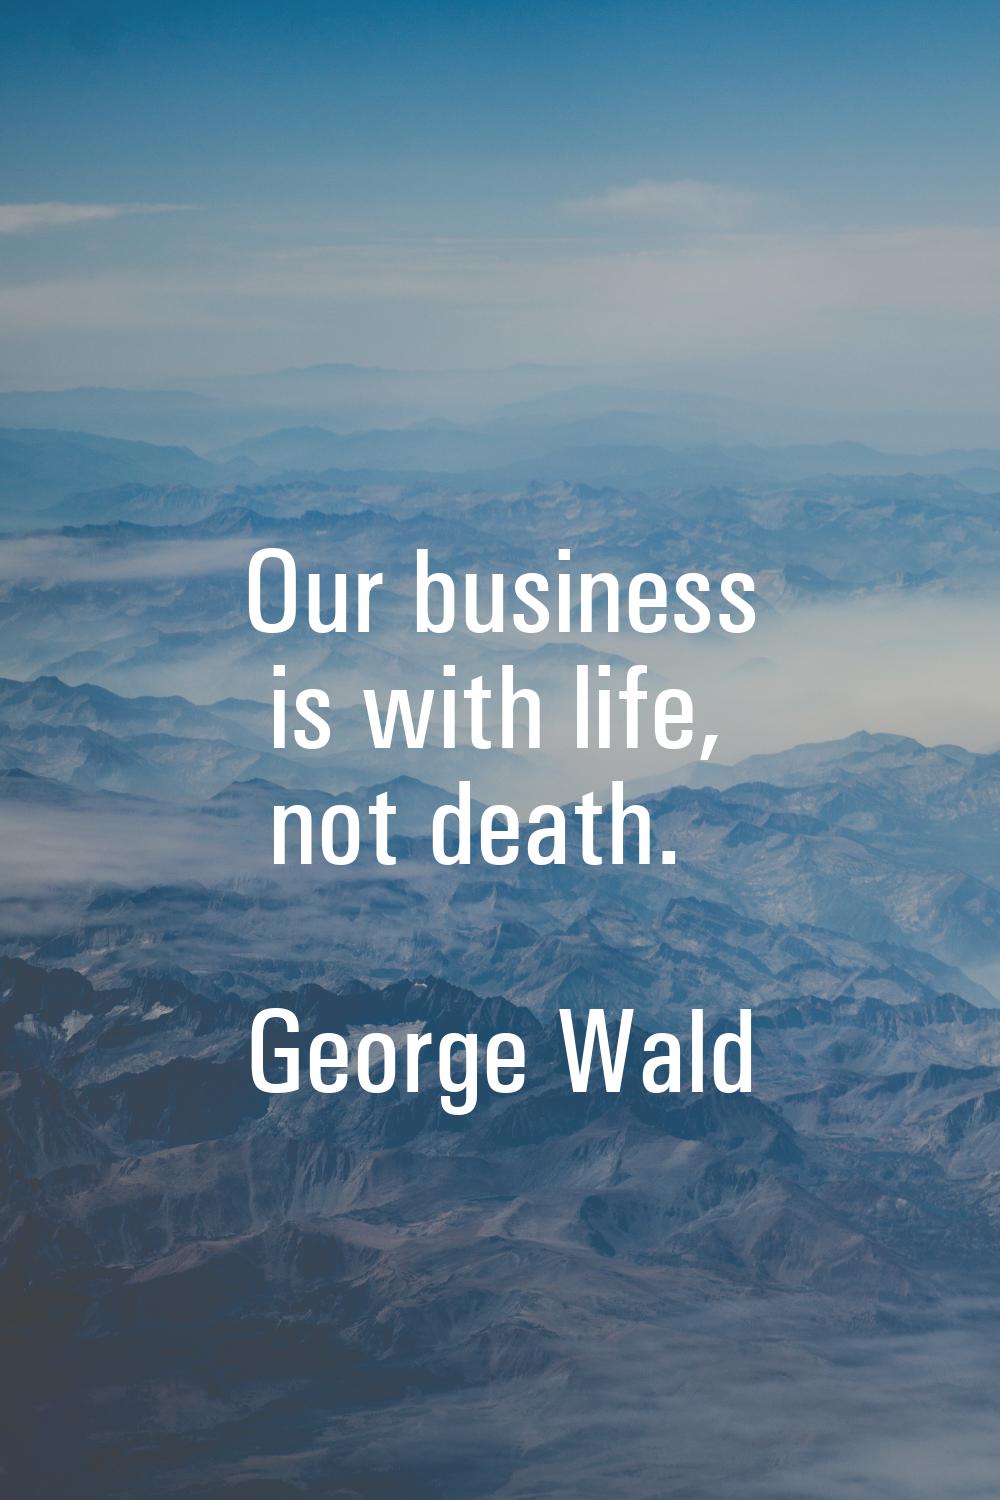 Our business is with life, not death.